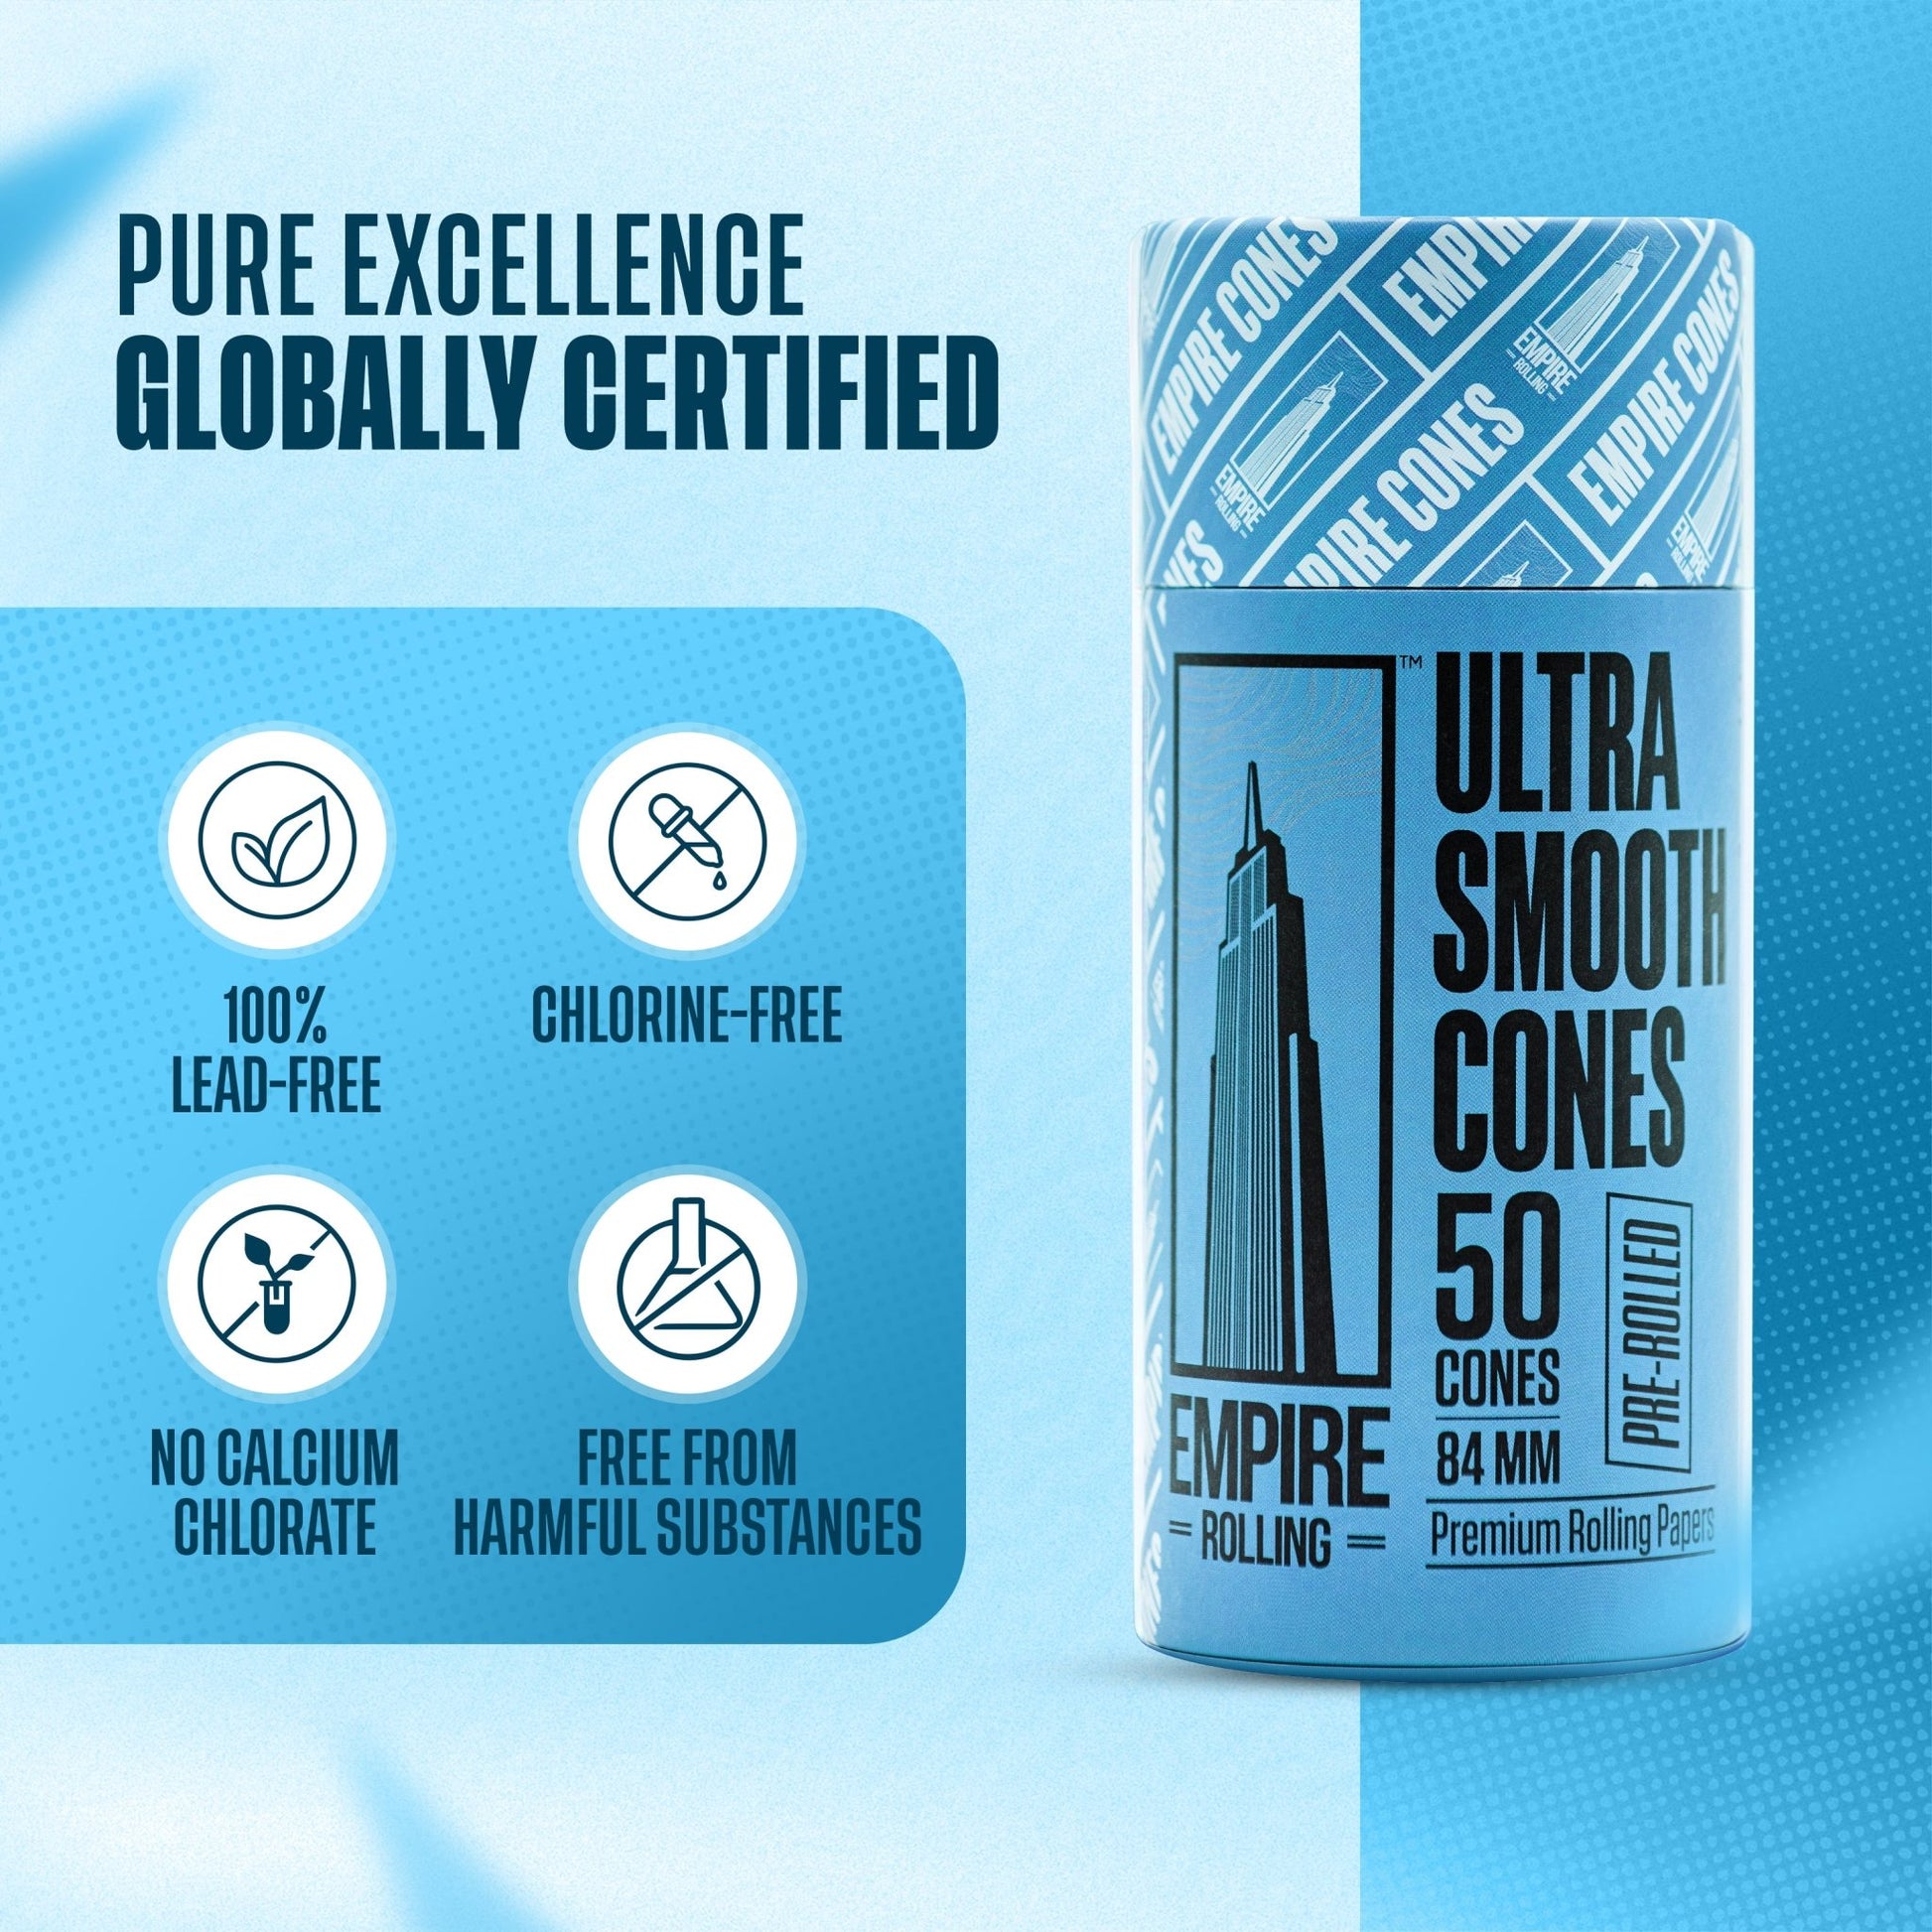 Empire Rolling's King Size Organic Hemp Rolling Papers, eco-friendly and crafted with high-quality, natural materials for a premium smoking experience.Ultra Smooth Blue Cones 50 Count - Empire Rolling Papers